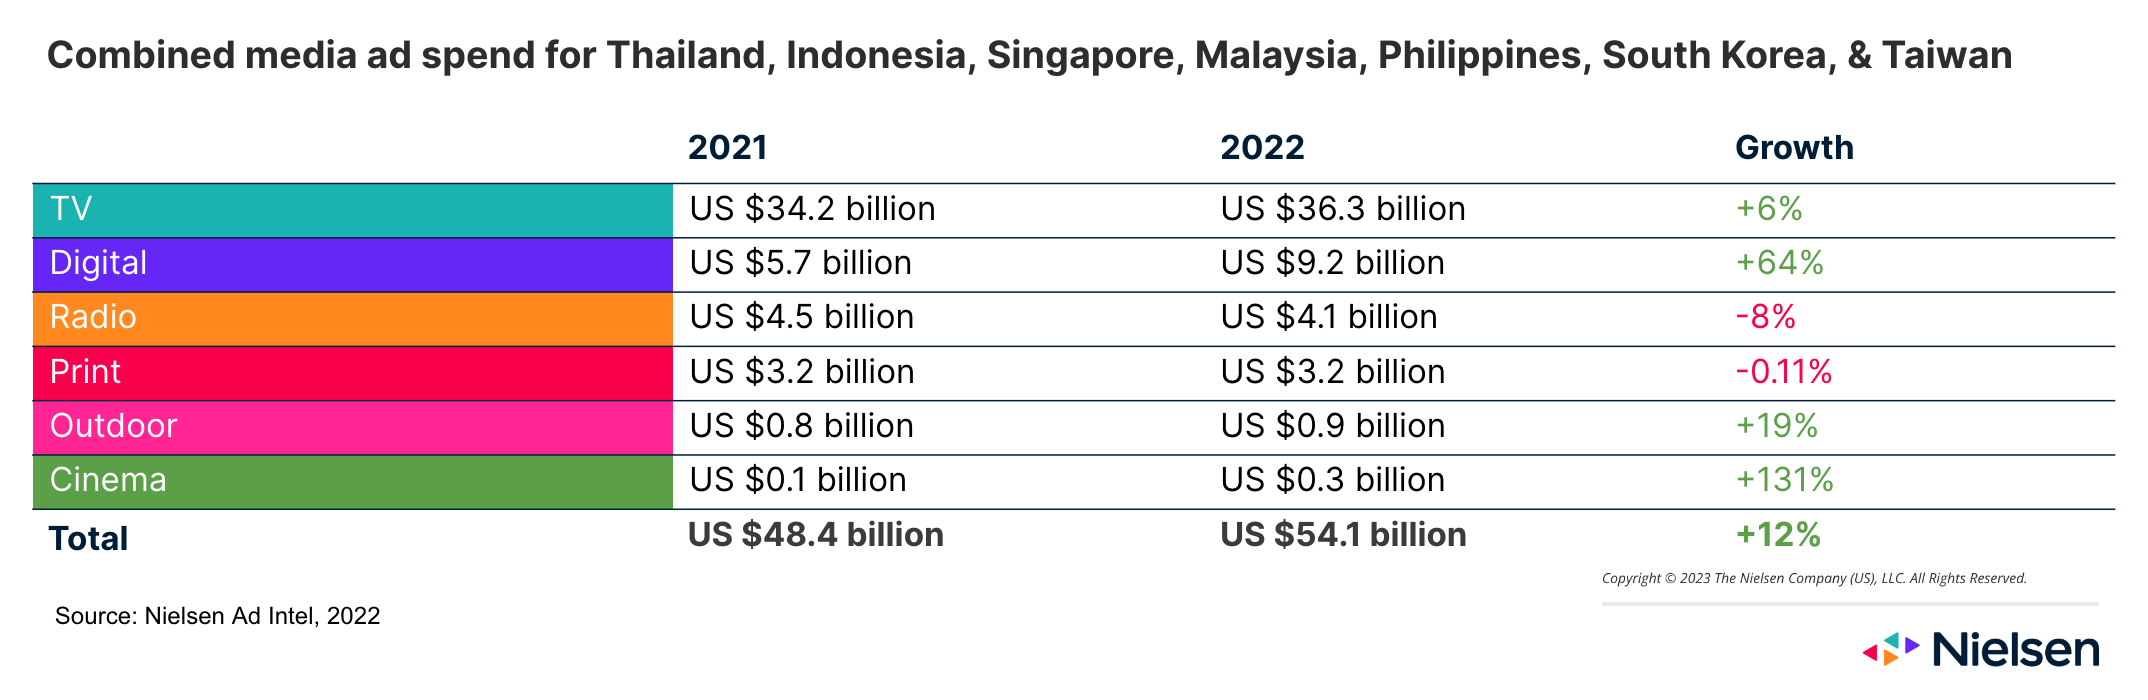 Digital ad spend in Asia jumped 64% in 2022, as overall ad investment increased by 12%* Nielsen